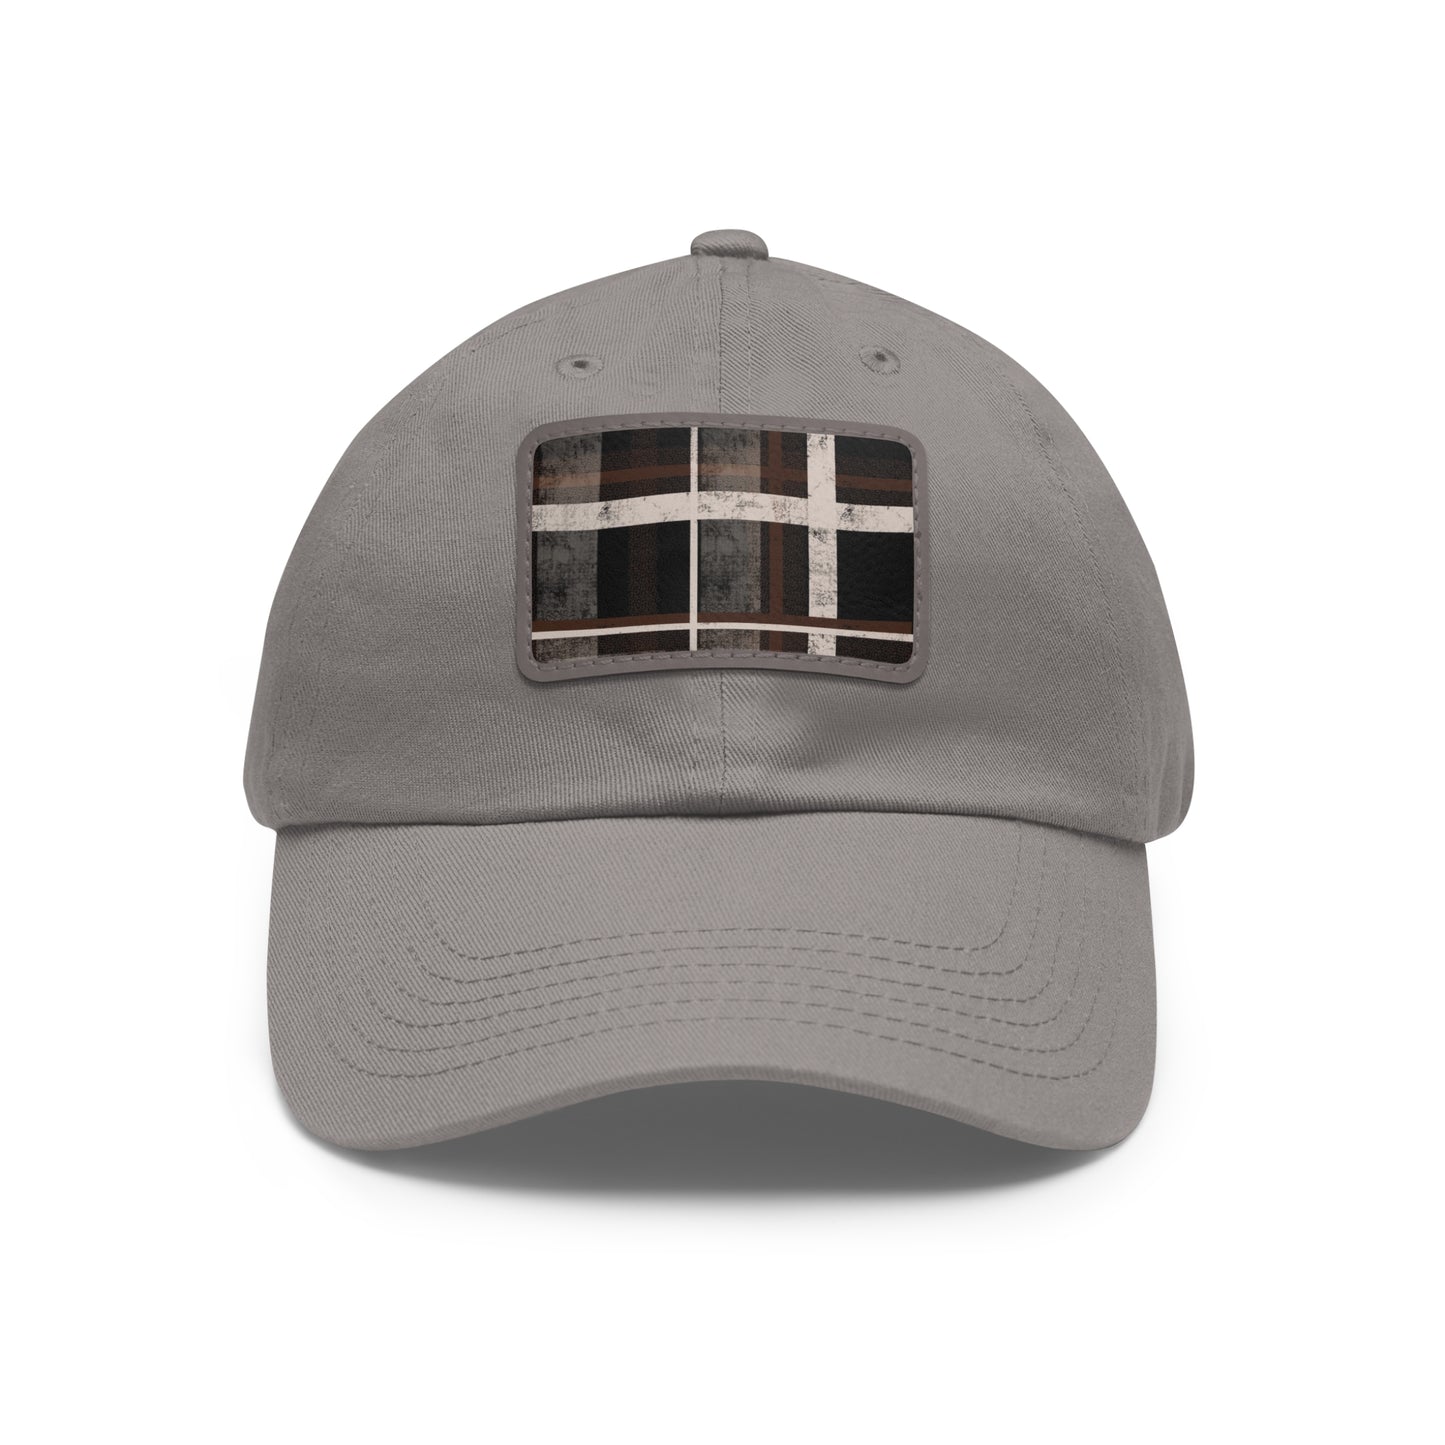 Black and Tan Flannel Dad Hat with Leather Patch